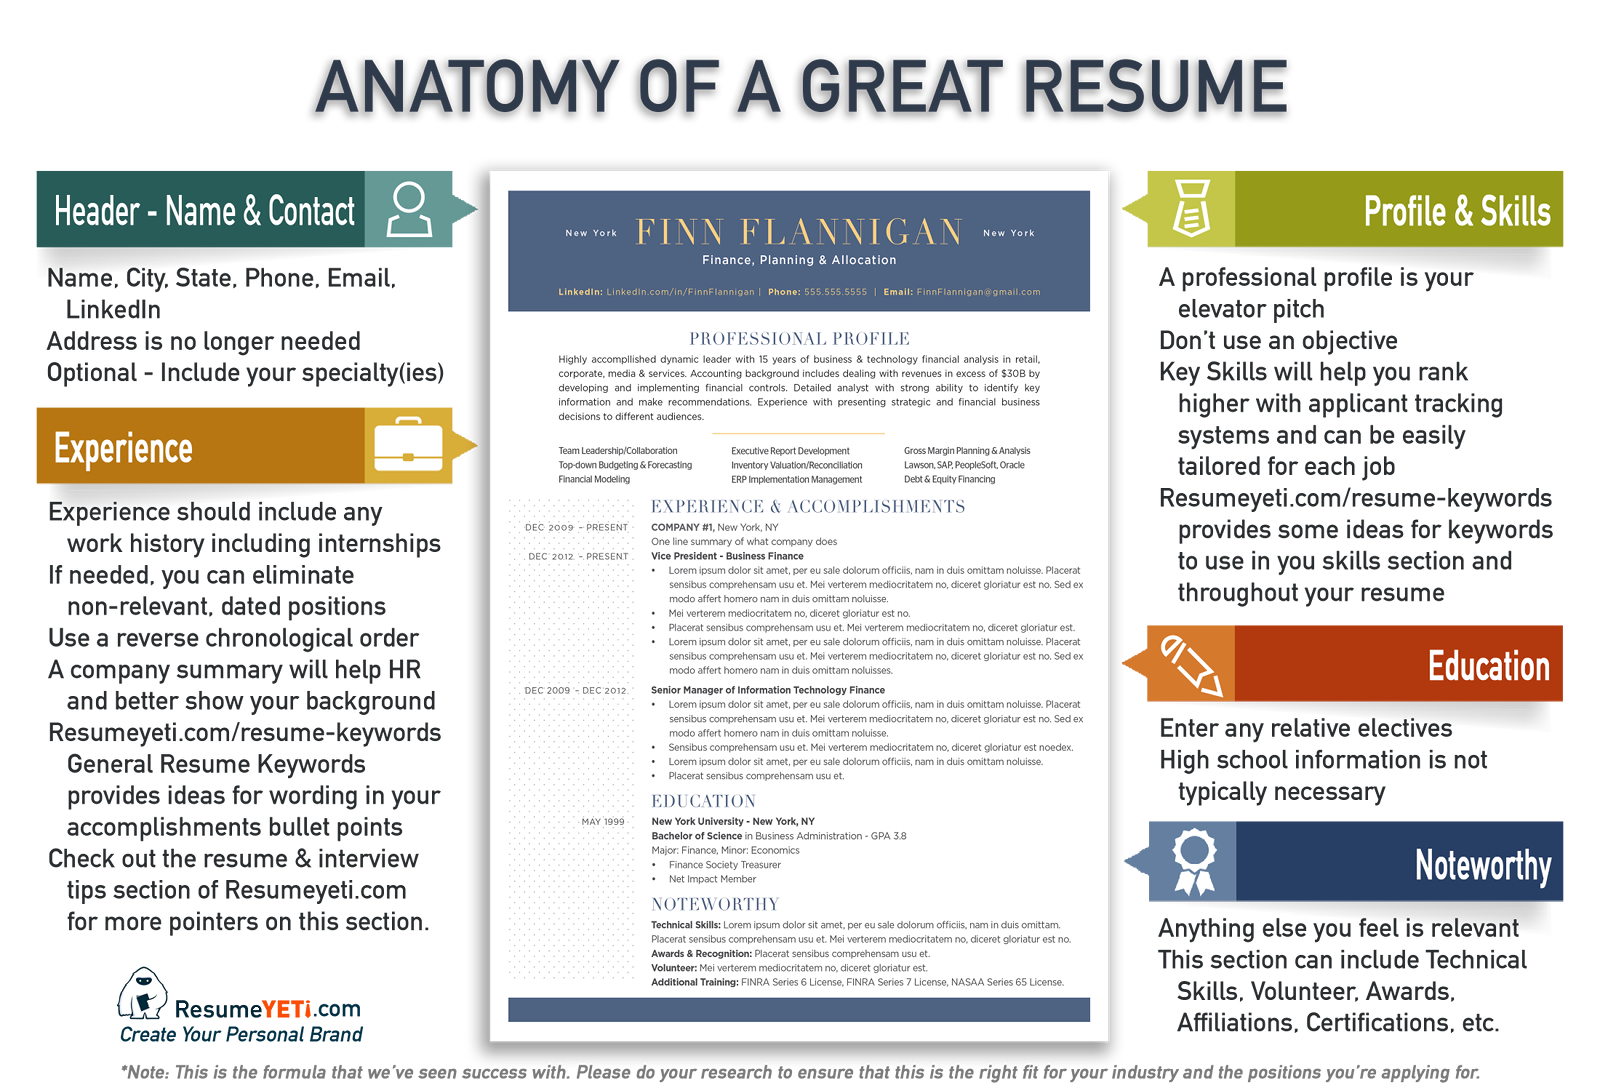 Anatomy of a great resume